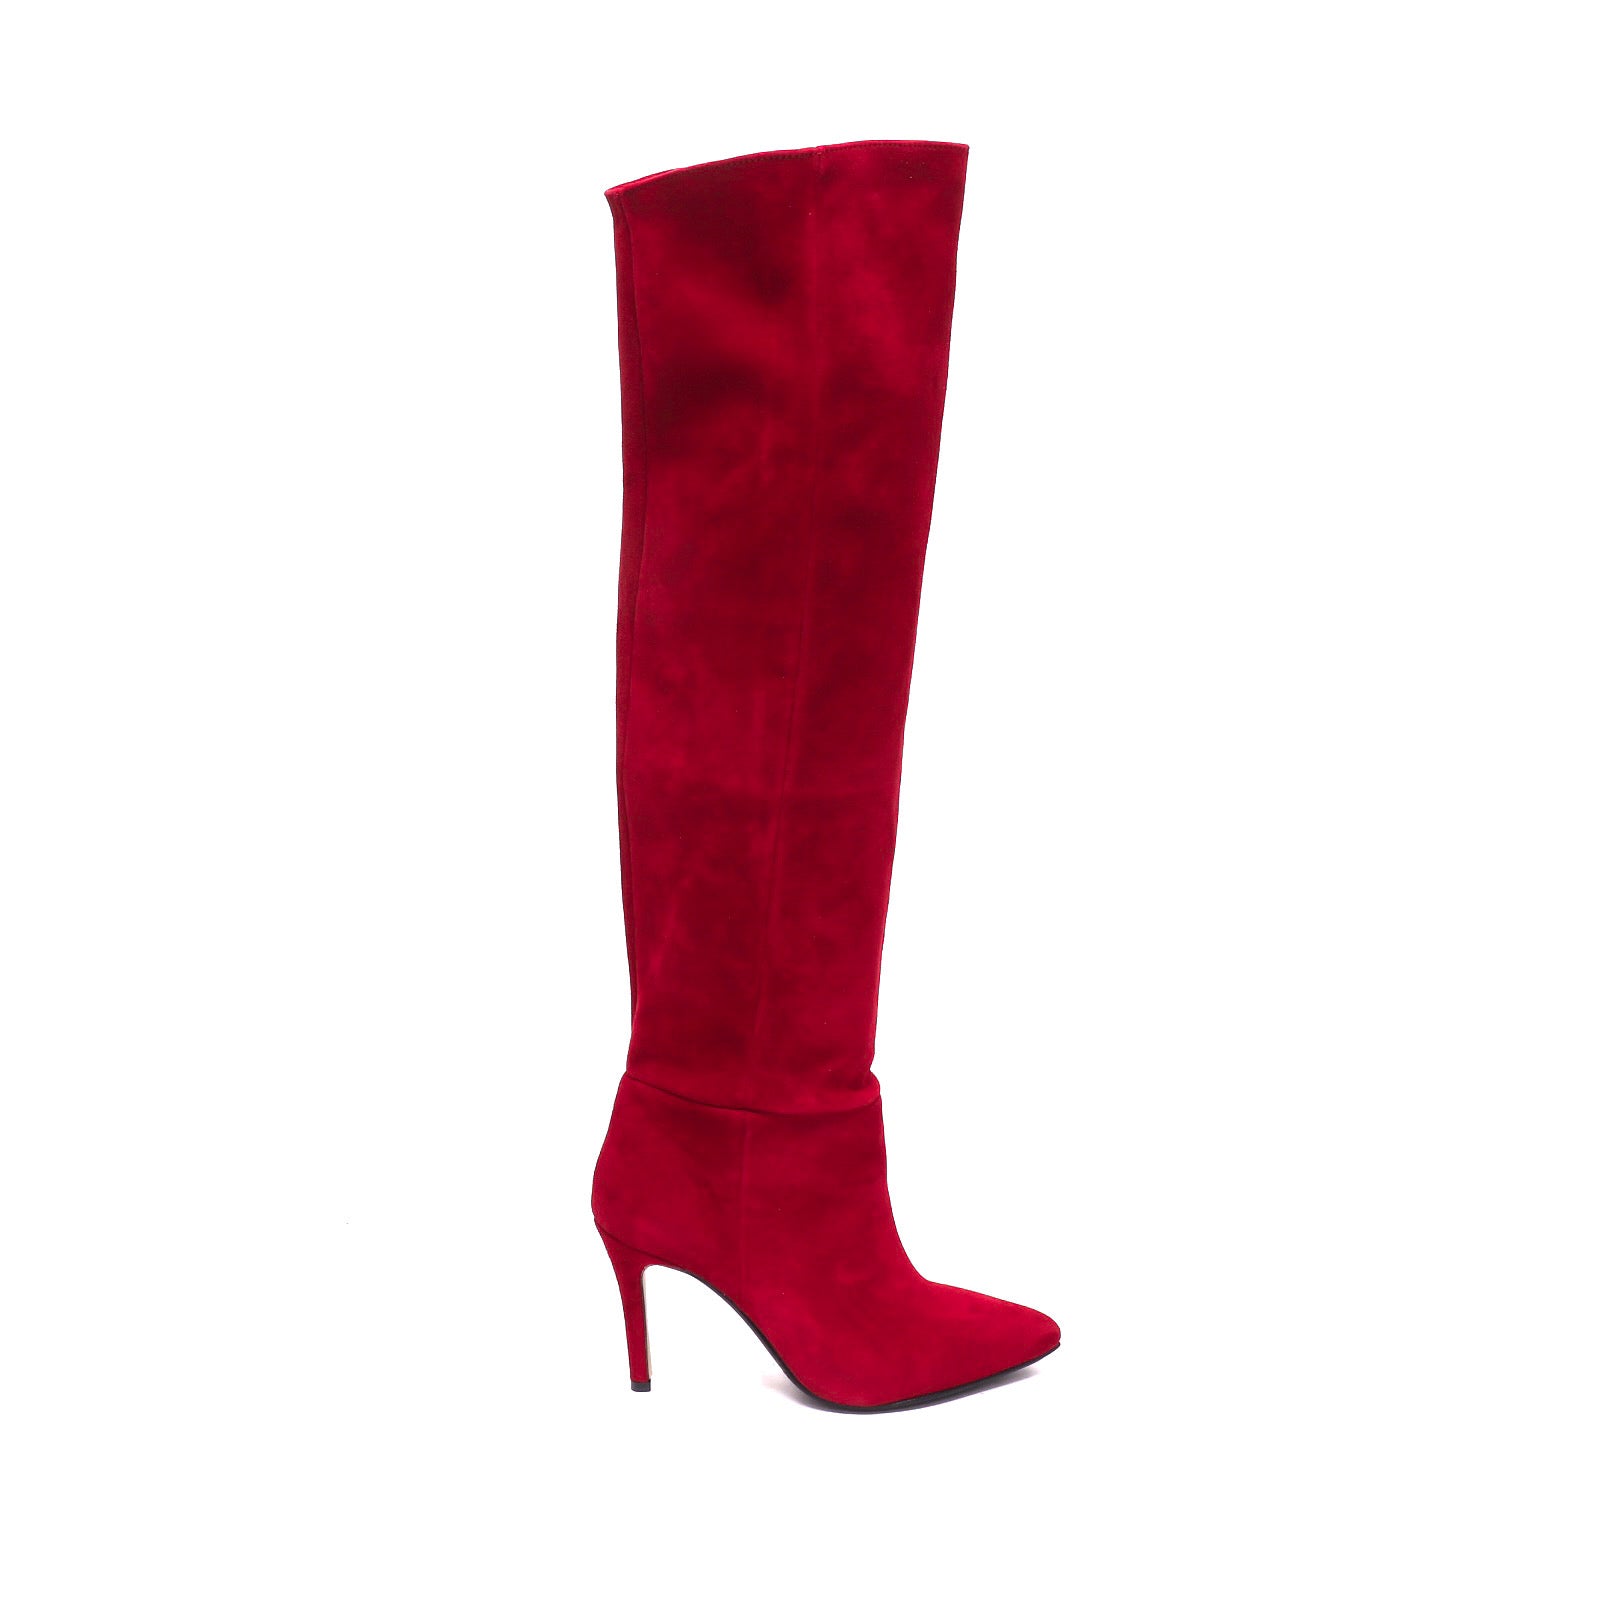 The Arianna Red Boot